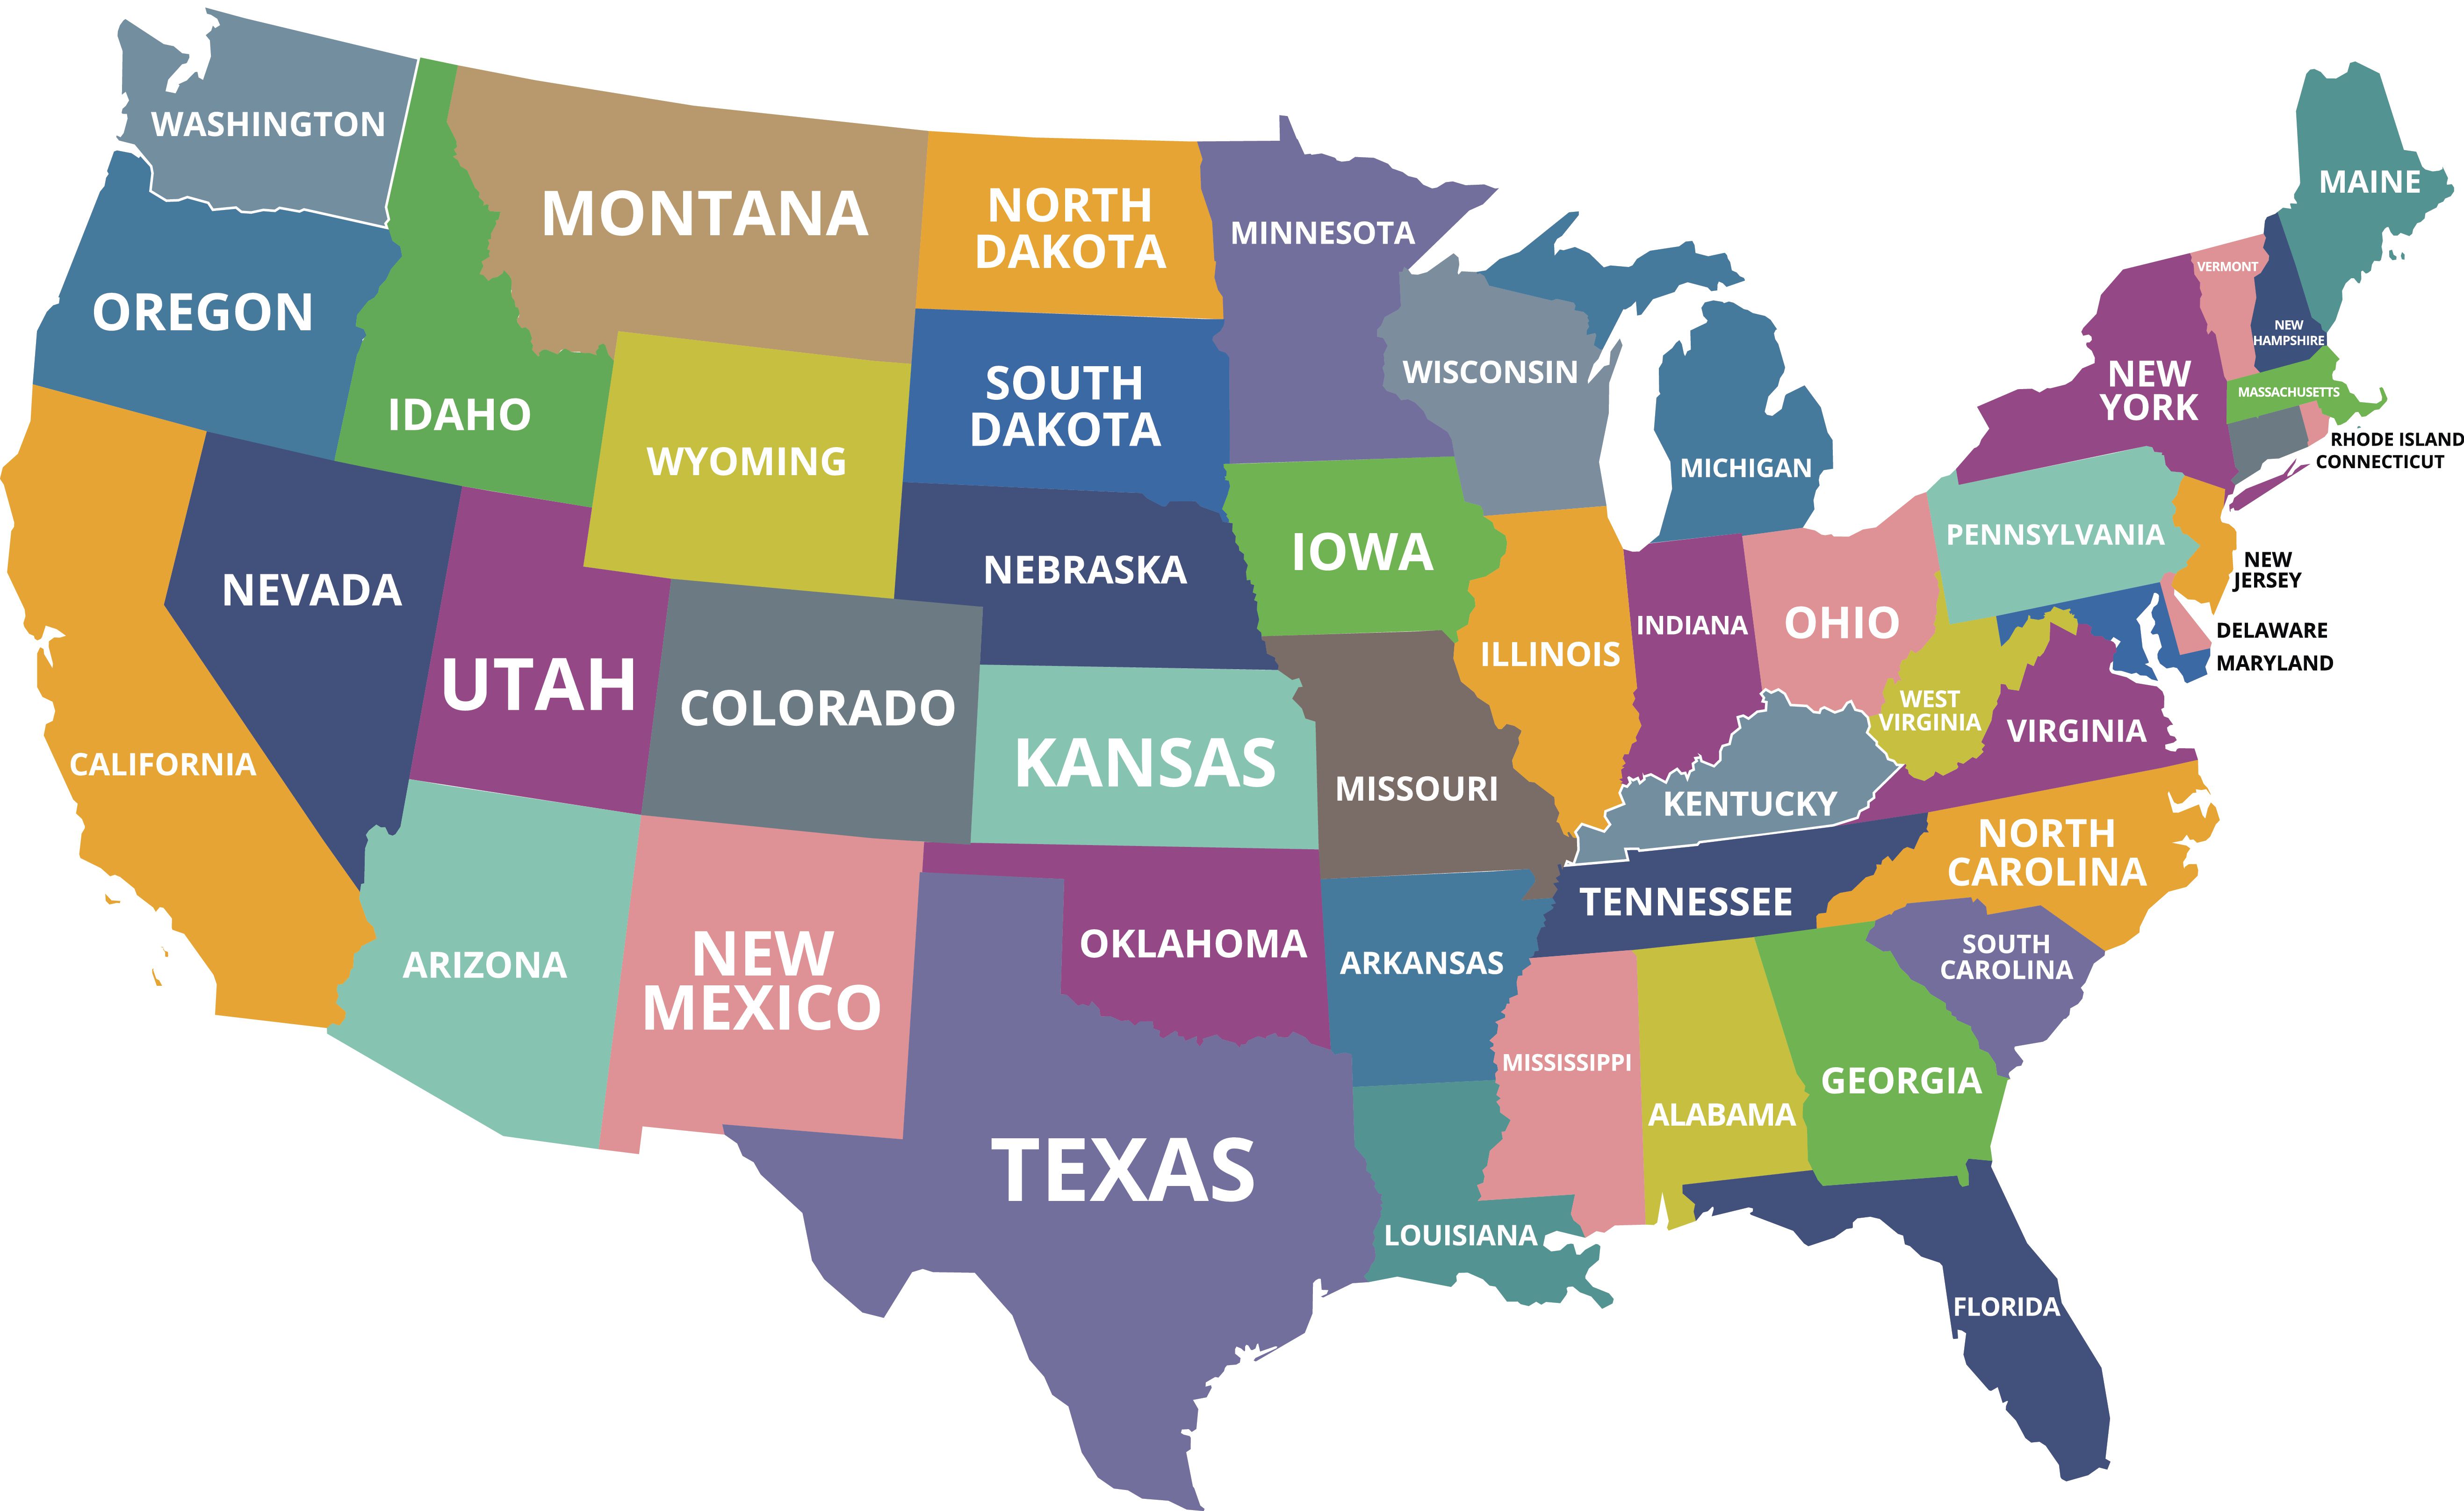 which u.s. state has the longest width east to west ?